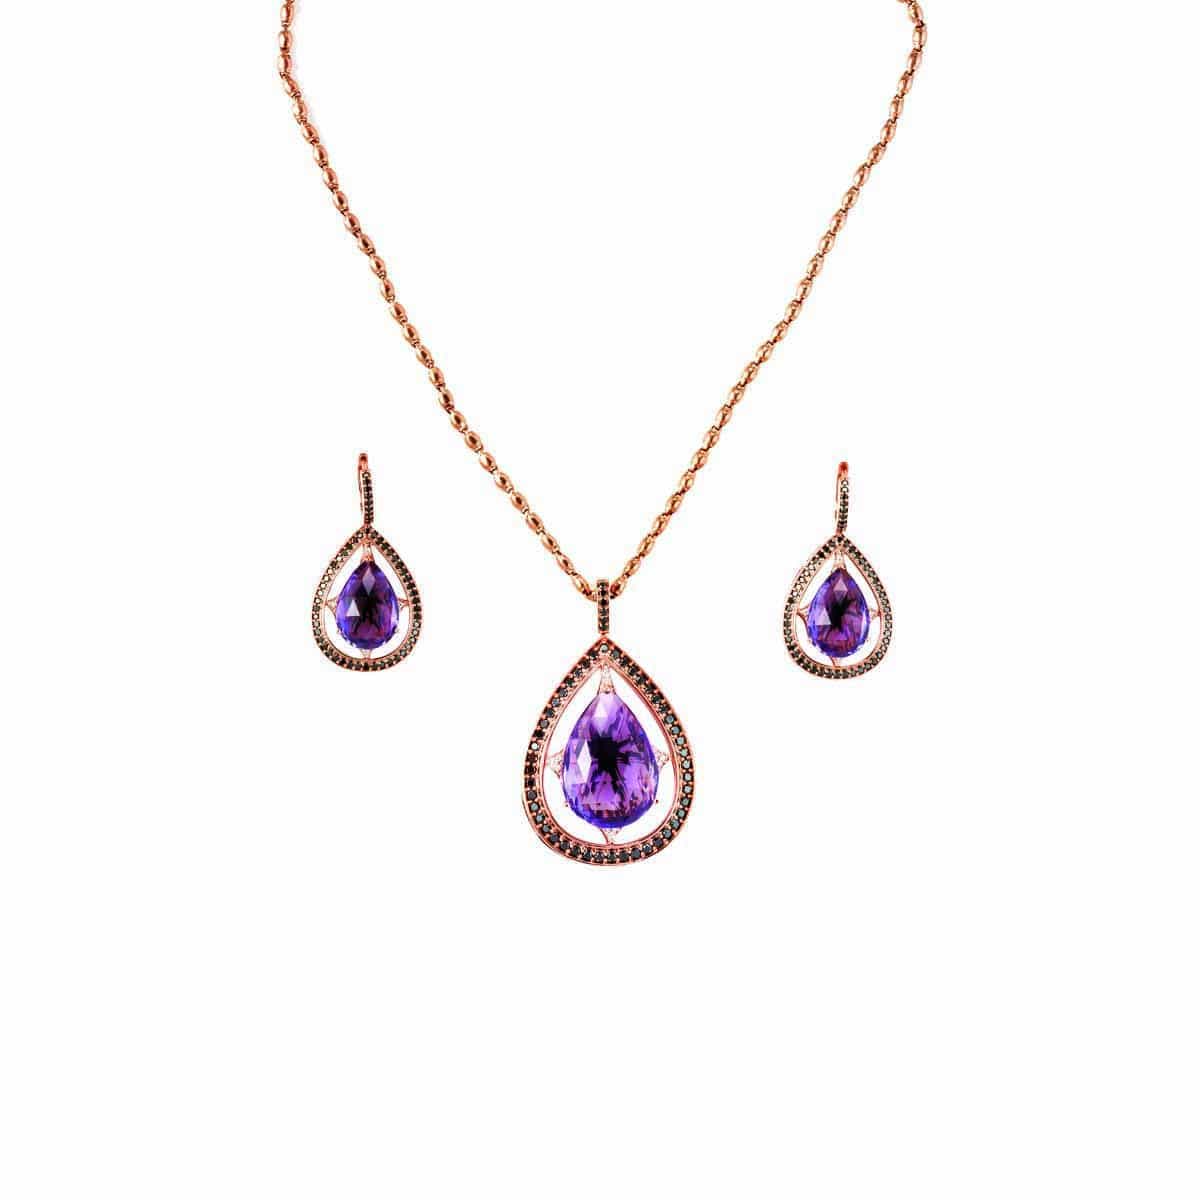 AMETHYST JEWELRY SET - FAVORED - Chris Aire Fine Jewelry & Timepieces